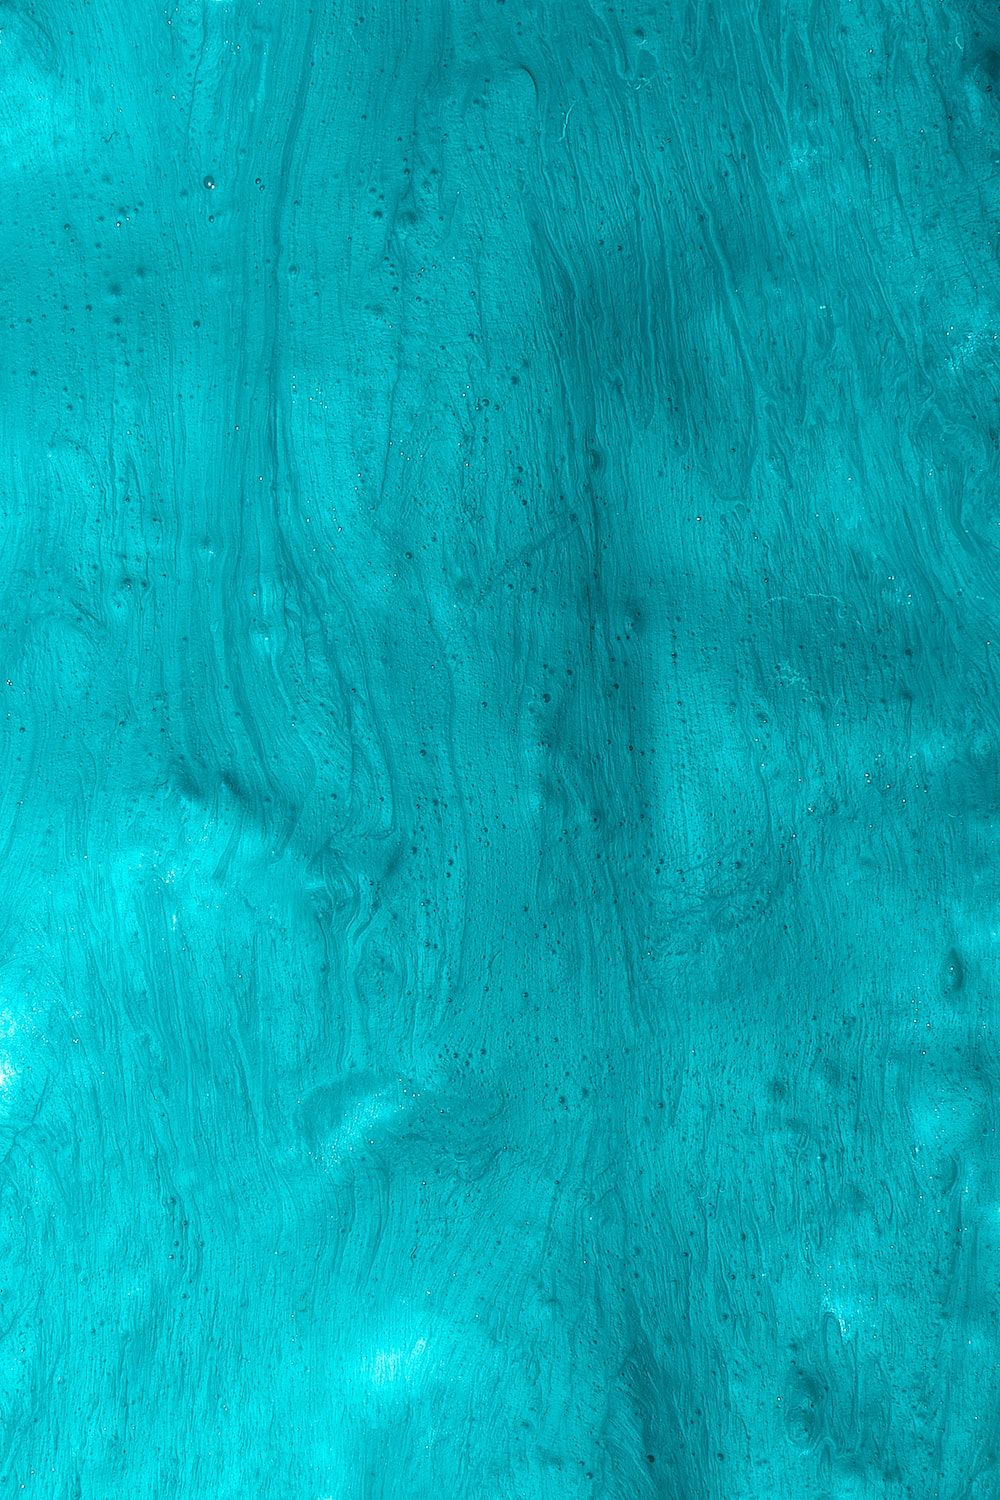 A close up of an aqua colored water - Turquoise